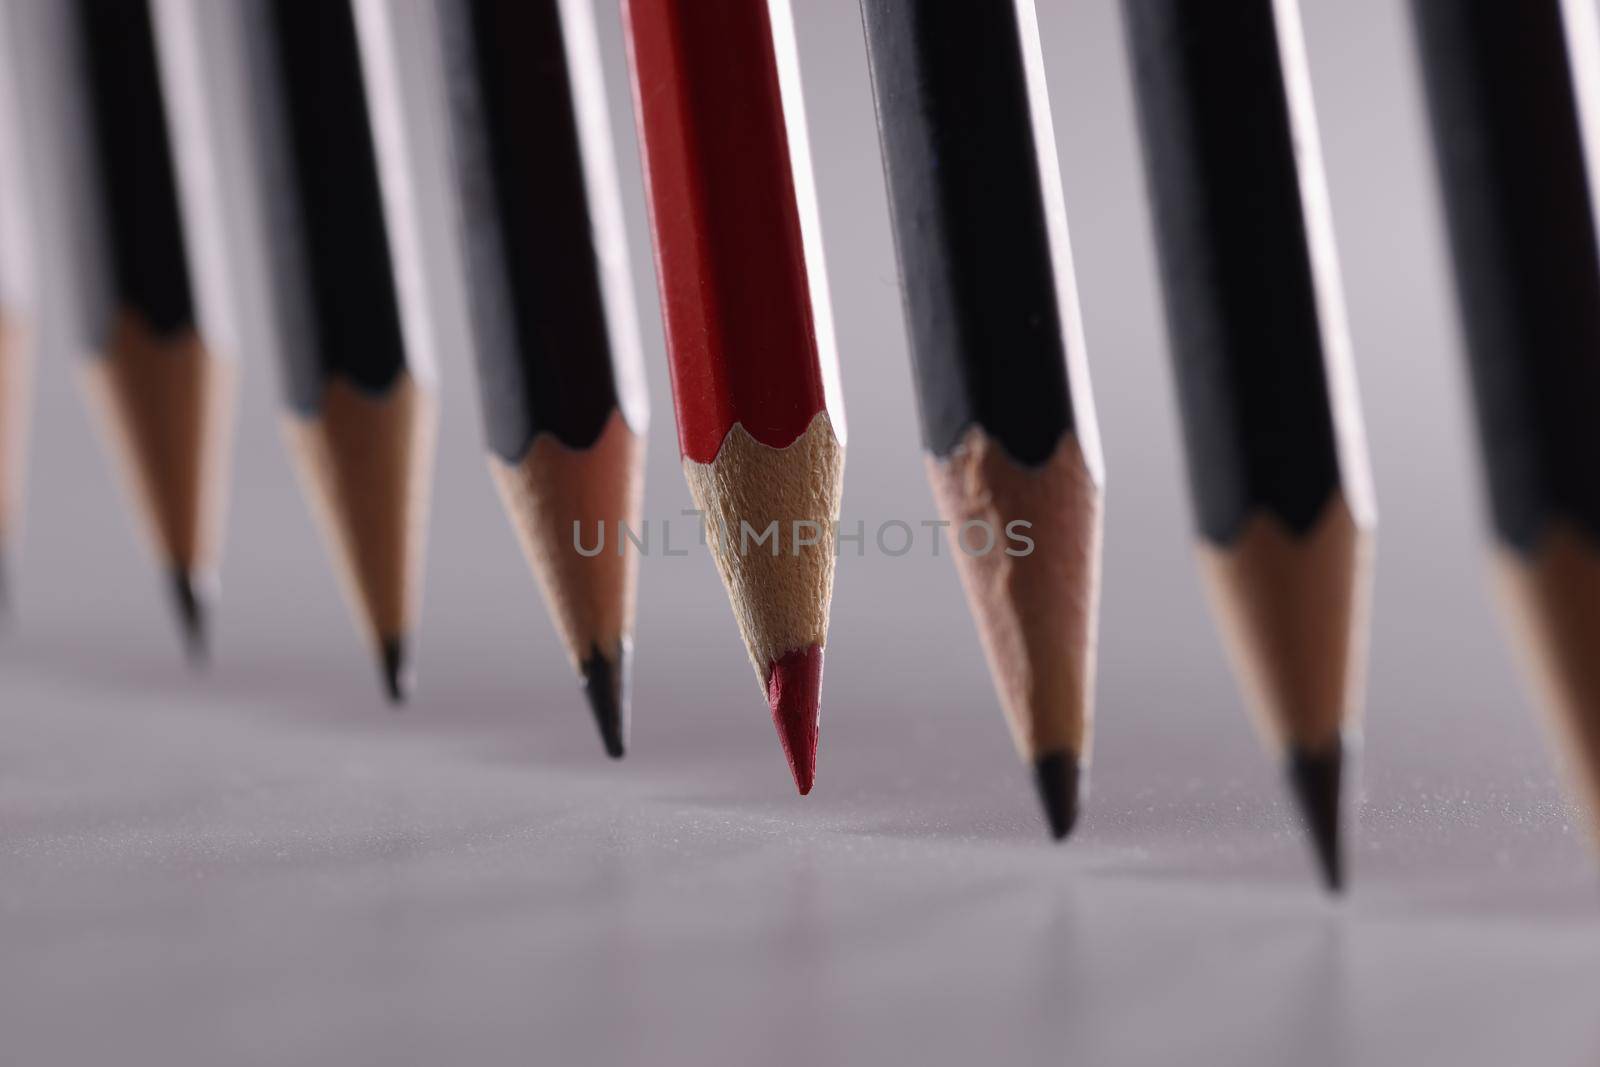 Black pencils in the center with red. by kuprevich